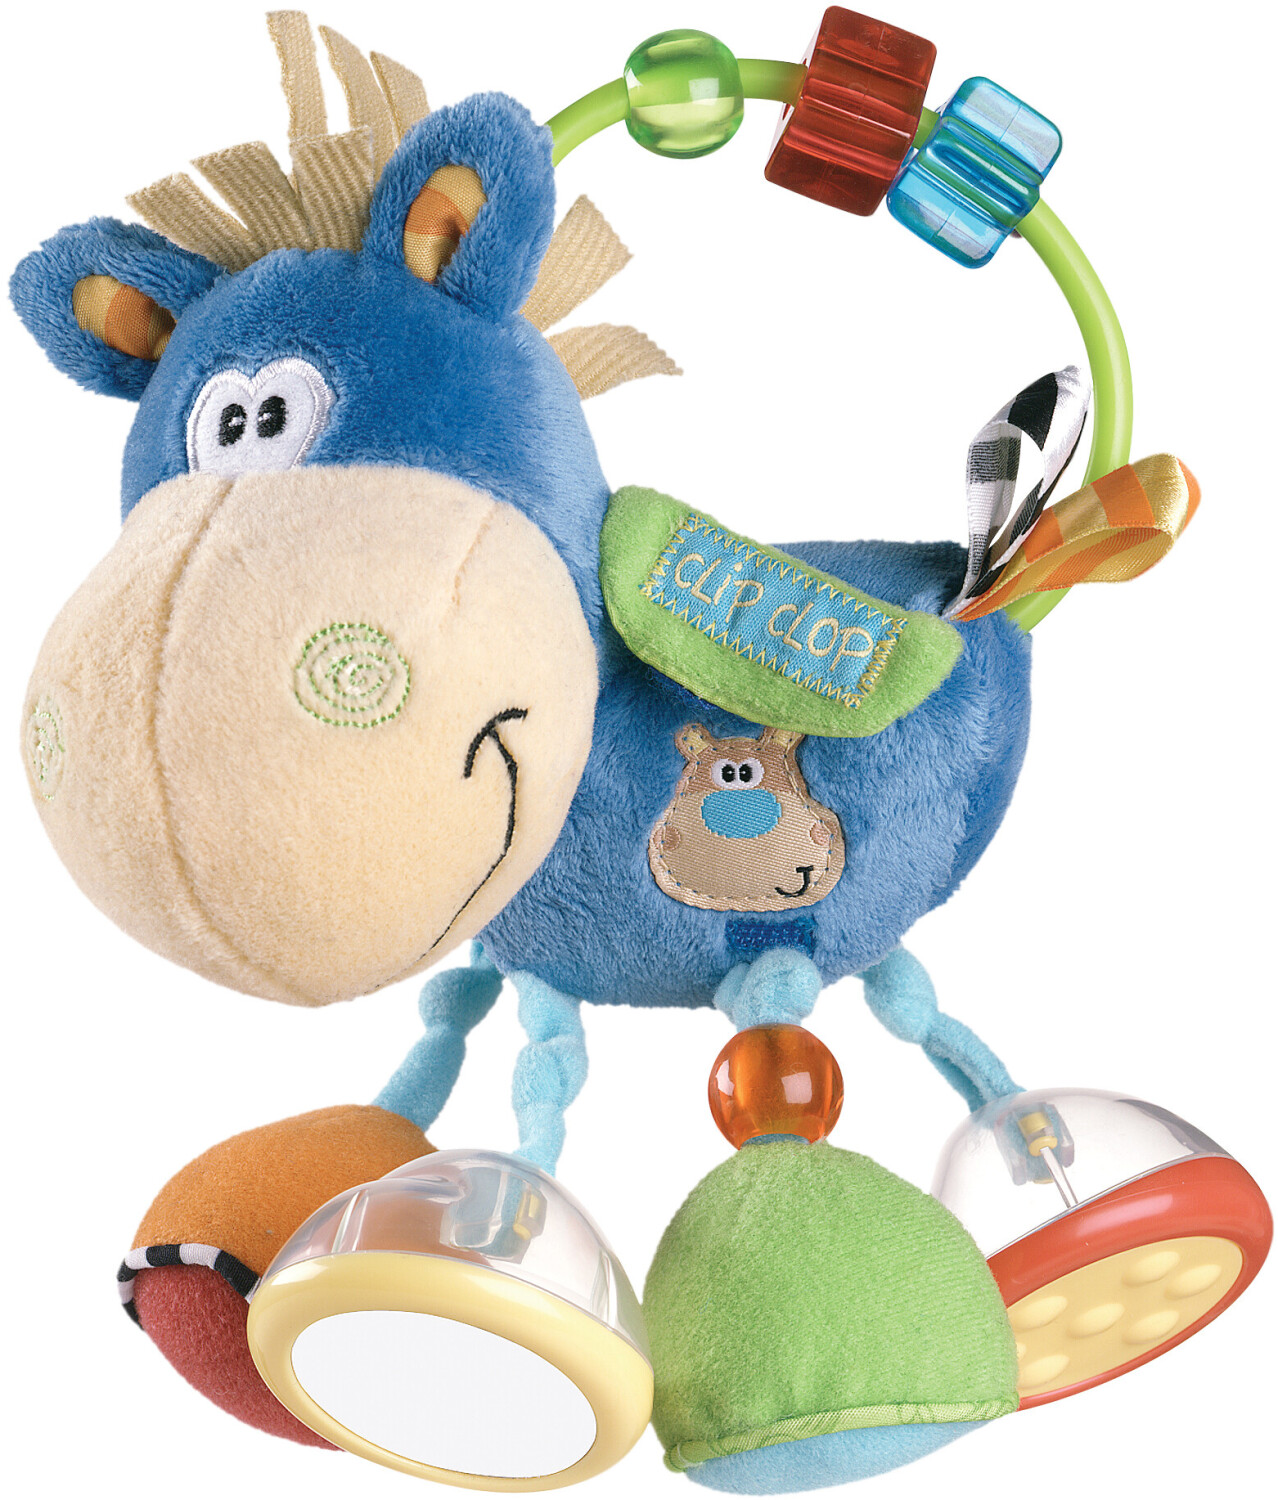 Photos - Rattle / Teether Playgro Rattle Clip Clop 